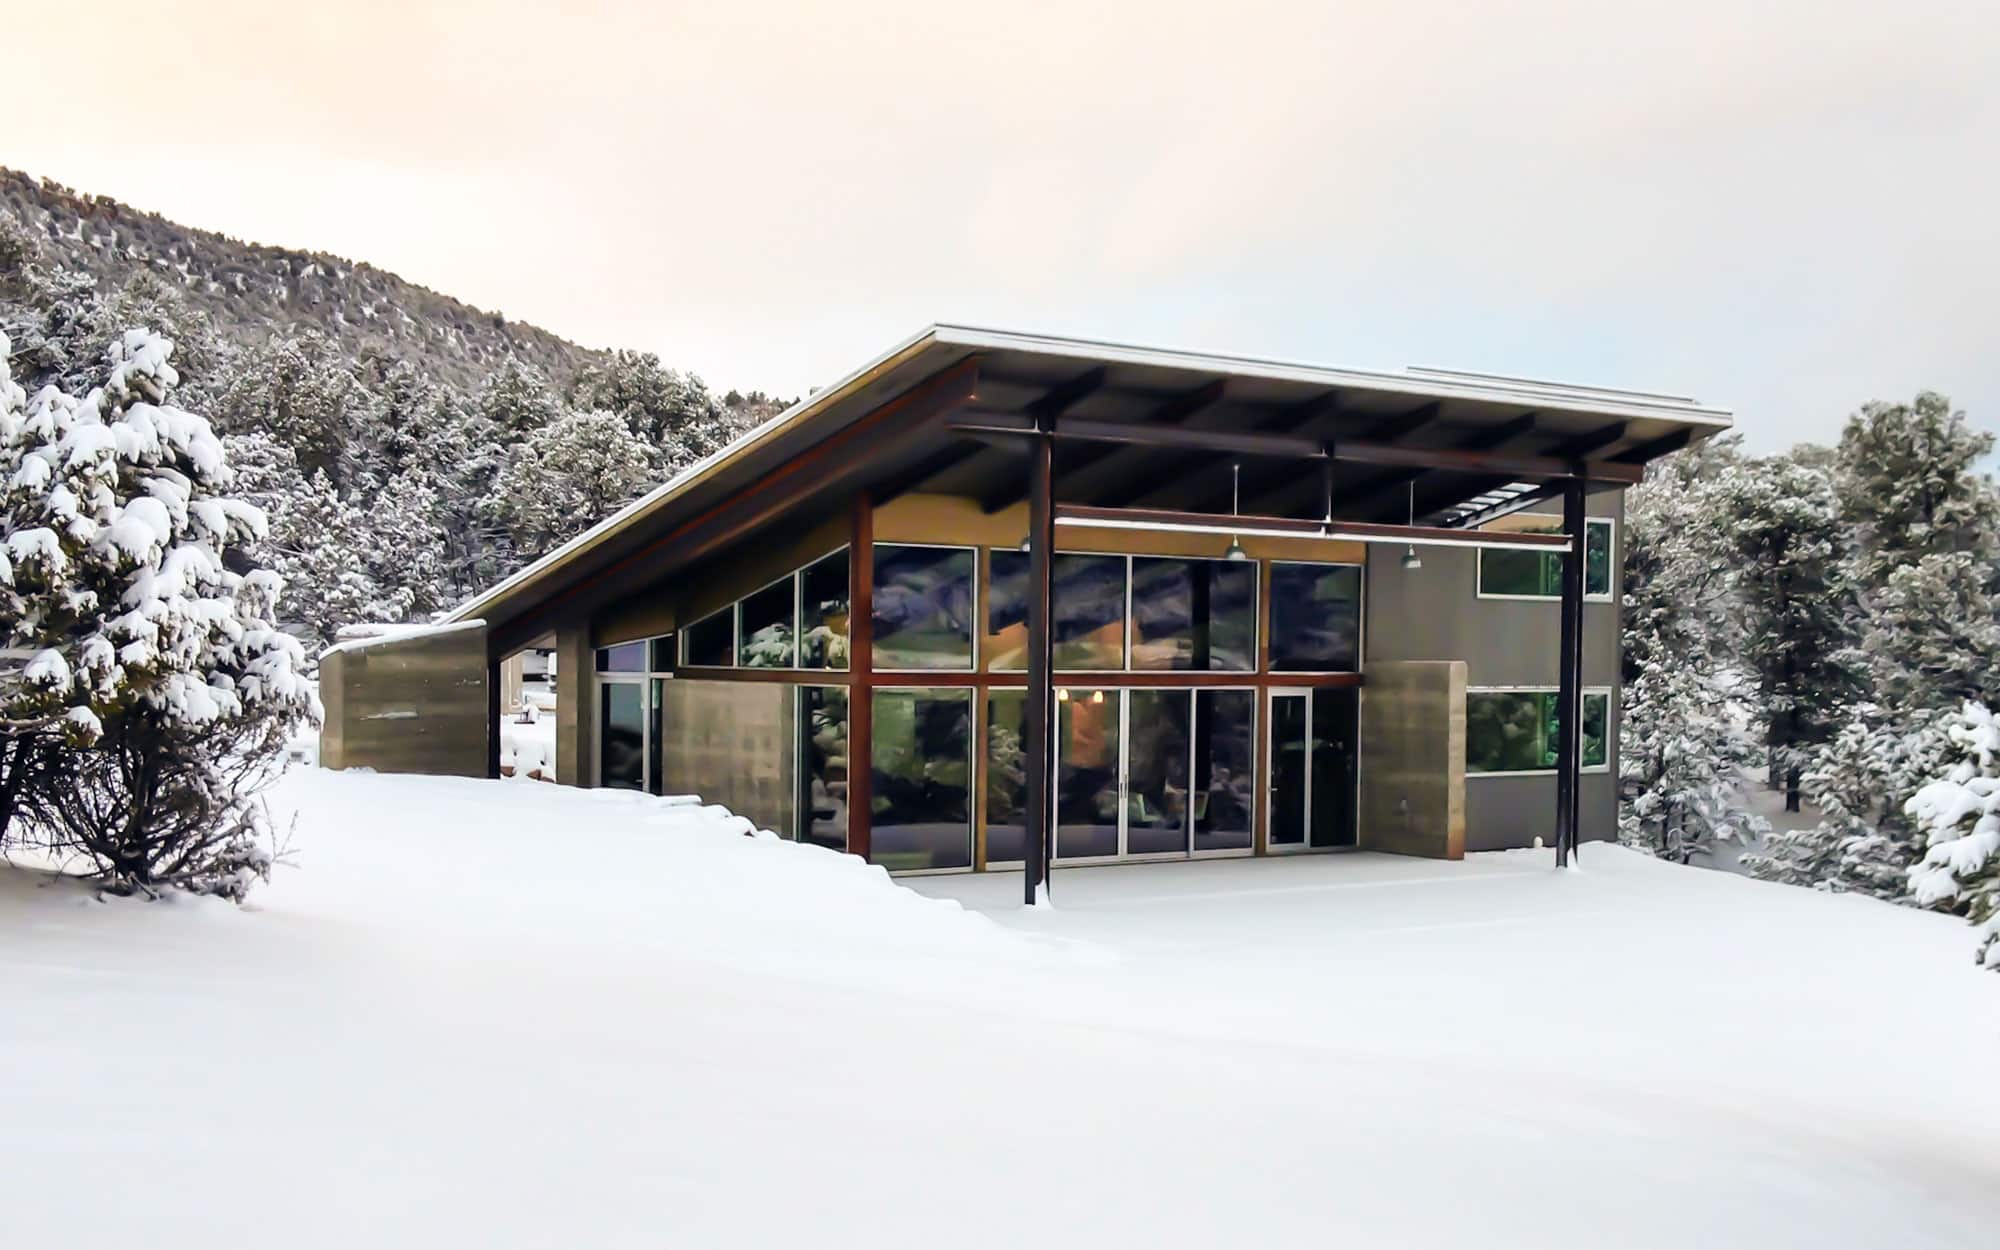 A home with a nearly all glass façade in a snowy landscape.